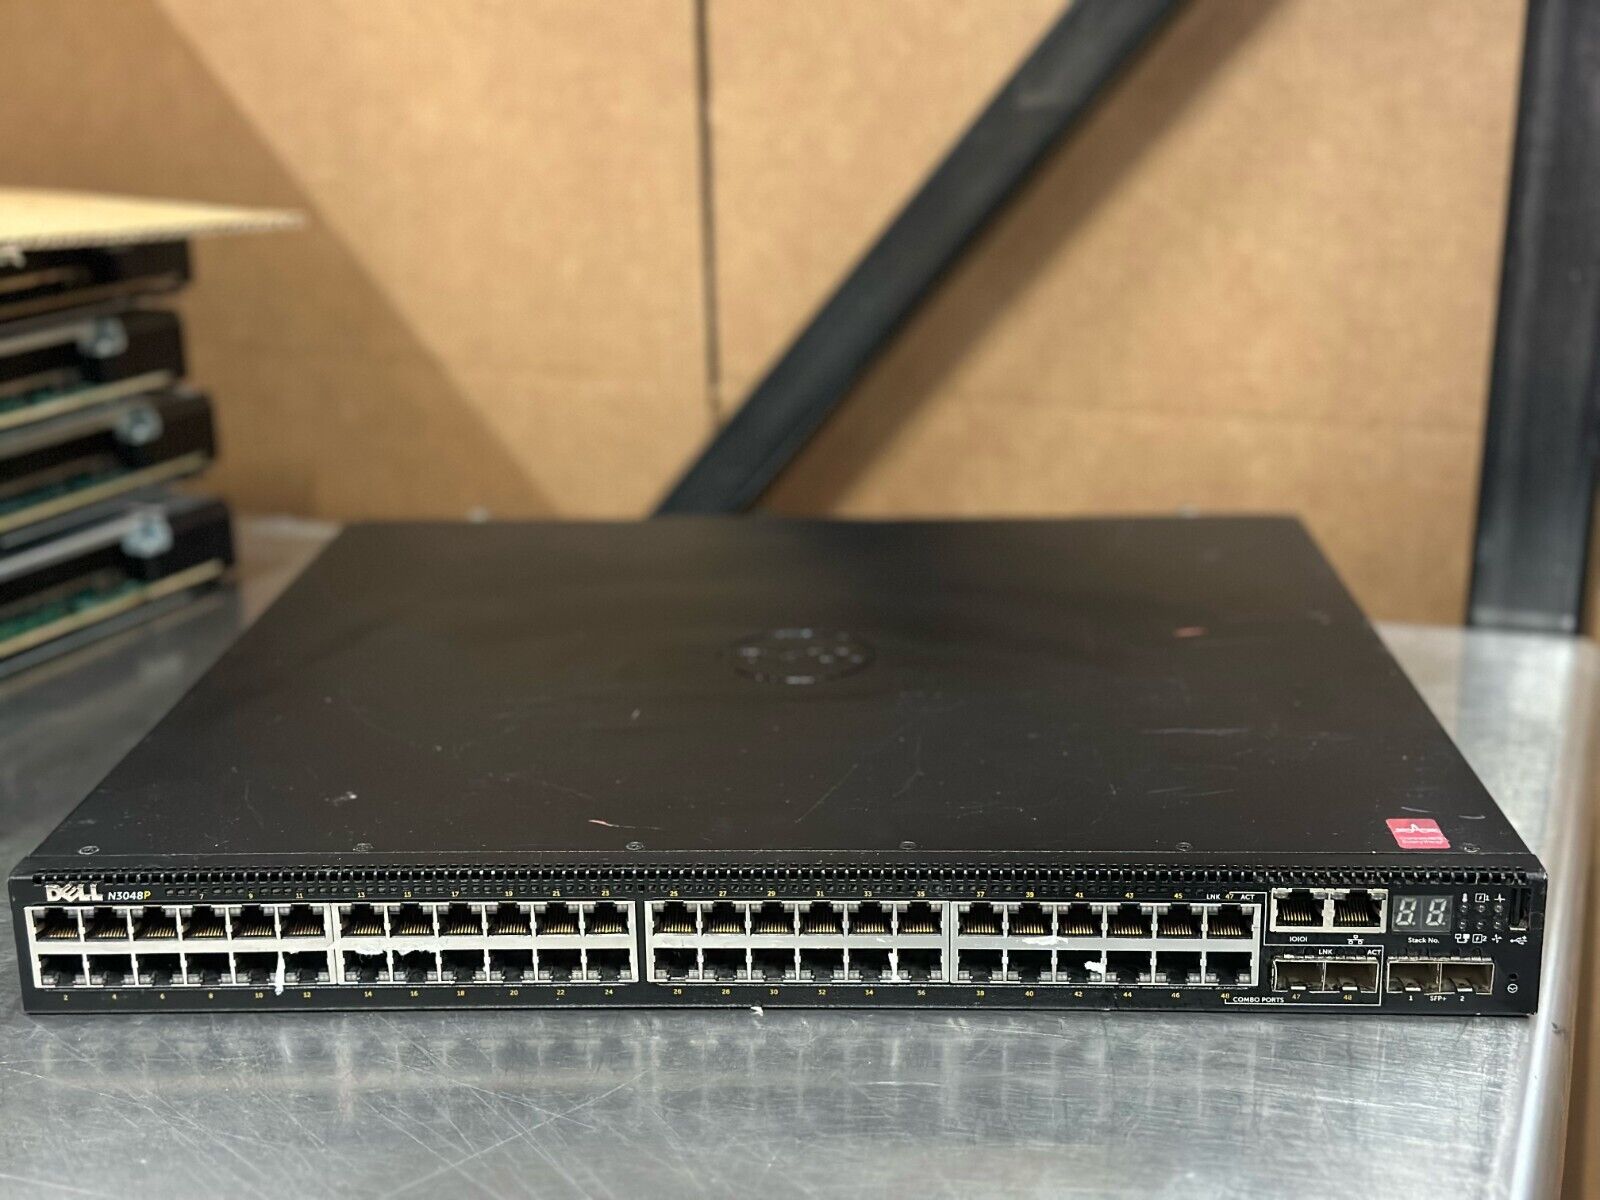 Dell Networking N3048P 48-Port PoE+ Gigabit Managed Network Switch